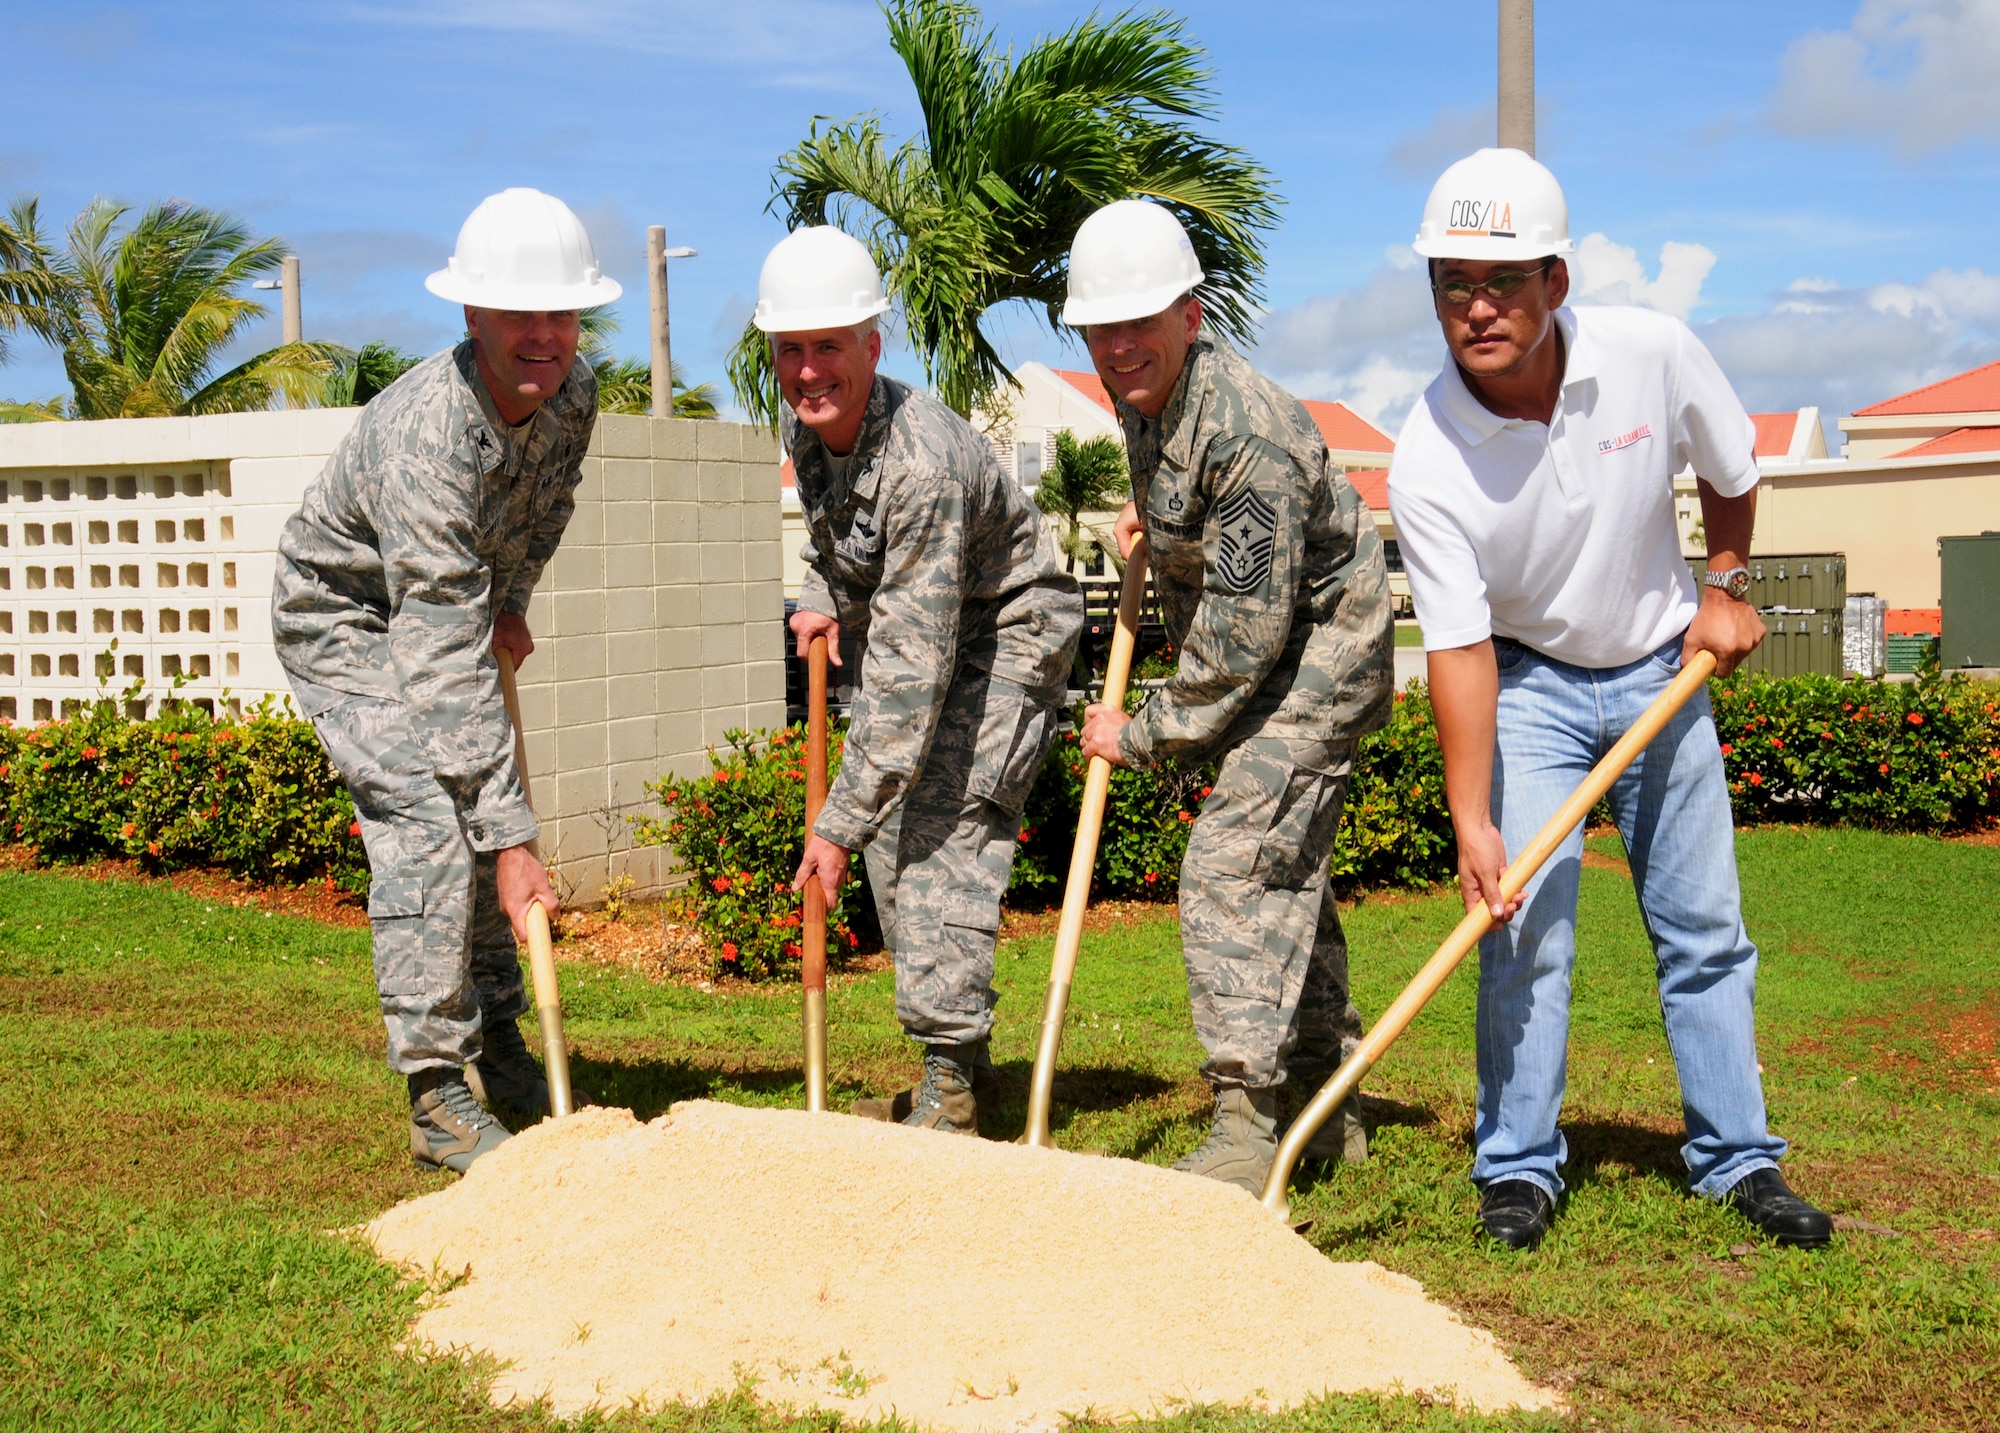 ANDERSEN AIR FORCE BASE, Guam-- Leadership from Team Andersen and current contractors break ground for a new warehouse behind the 36th Medical Group June 22. The new warehouse will soon be constructed to store the 36 MDG's medical war reserve materials in one location. This new warehouse will add an additional 4,000 square feet of climate-controlled space, thus allowing the 36 MDG to consolidate all of its WRM assets in one location.(A logo was removed from a helmet to refrain from
endorsement)(U.S. Air Force photo illustration by Senior Airman Benjamin
Wiseman/Released)
